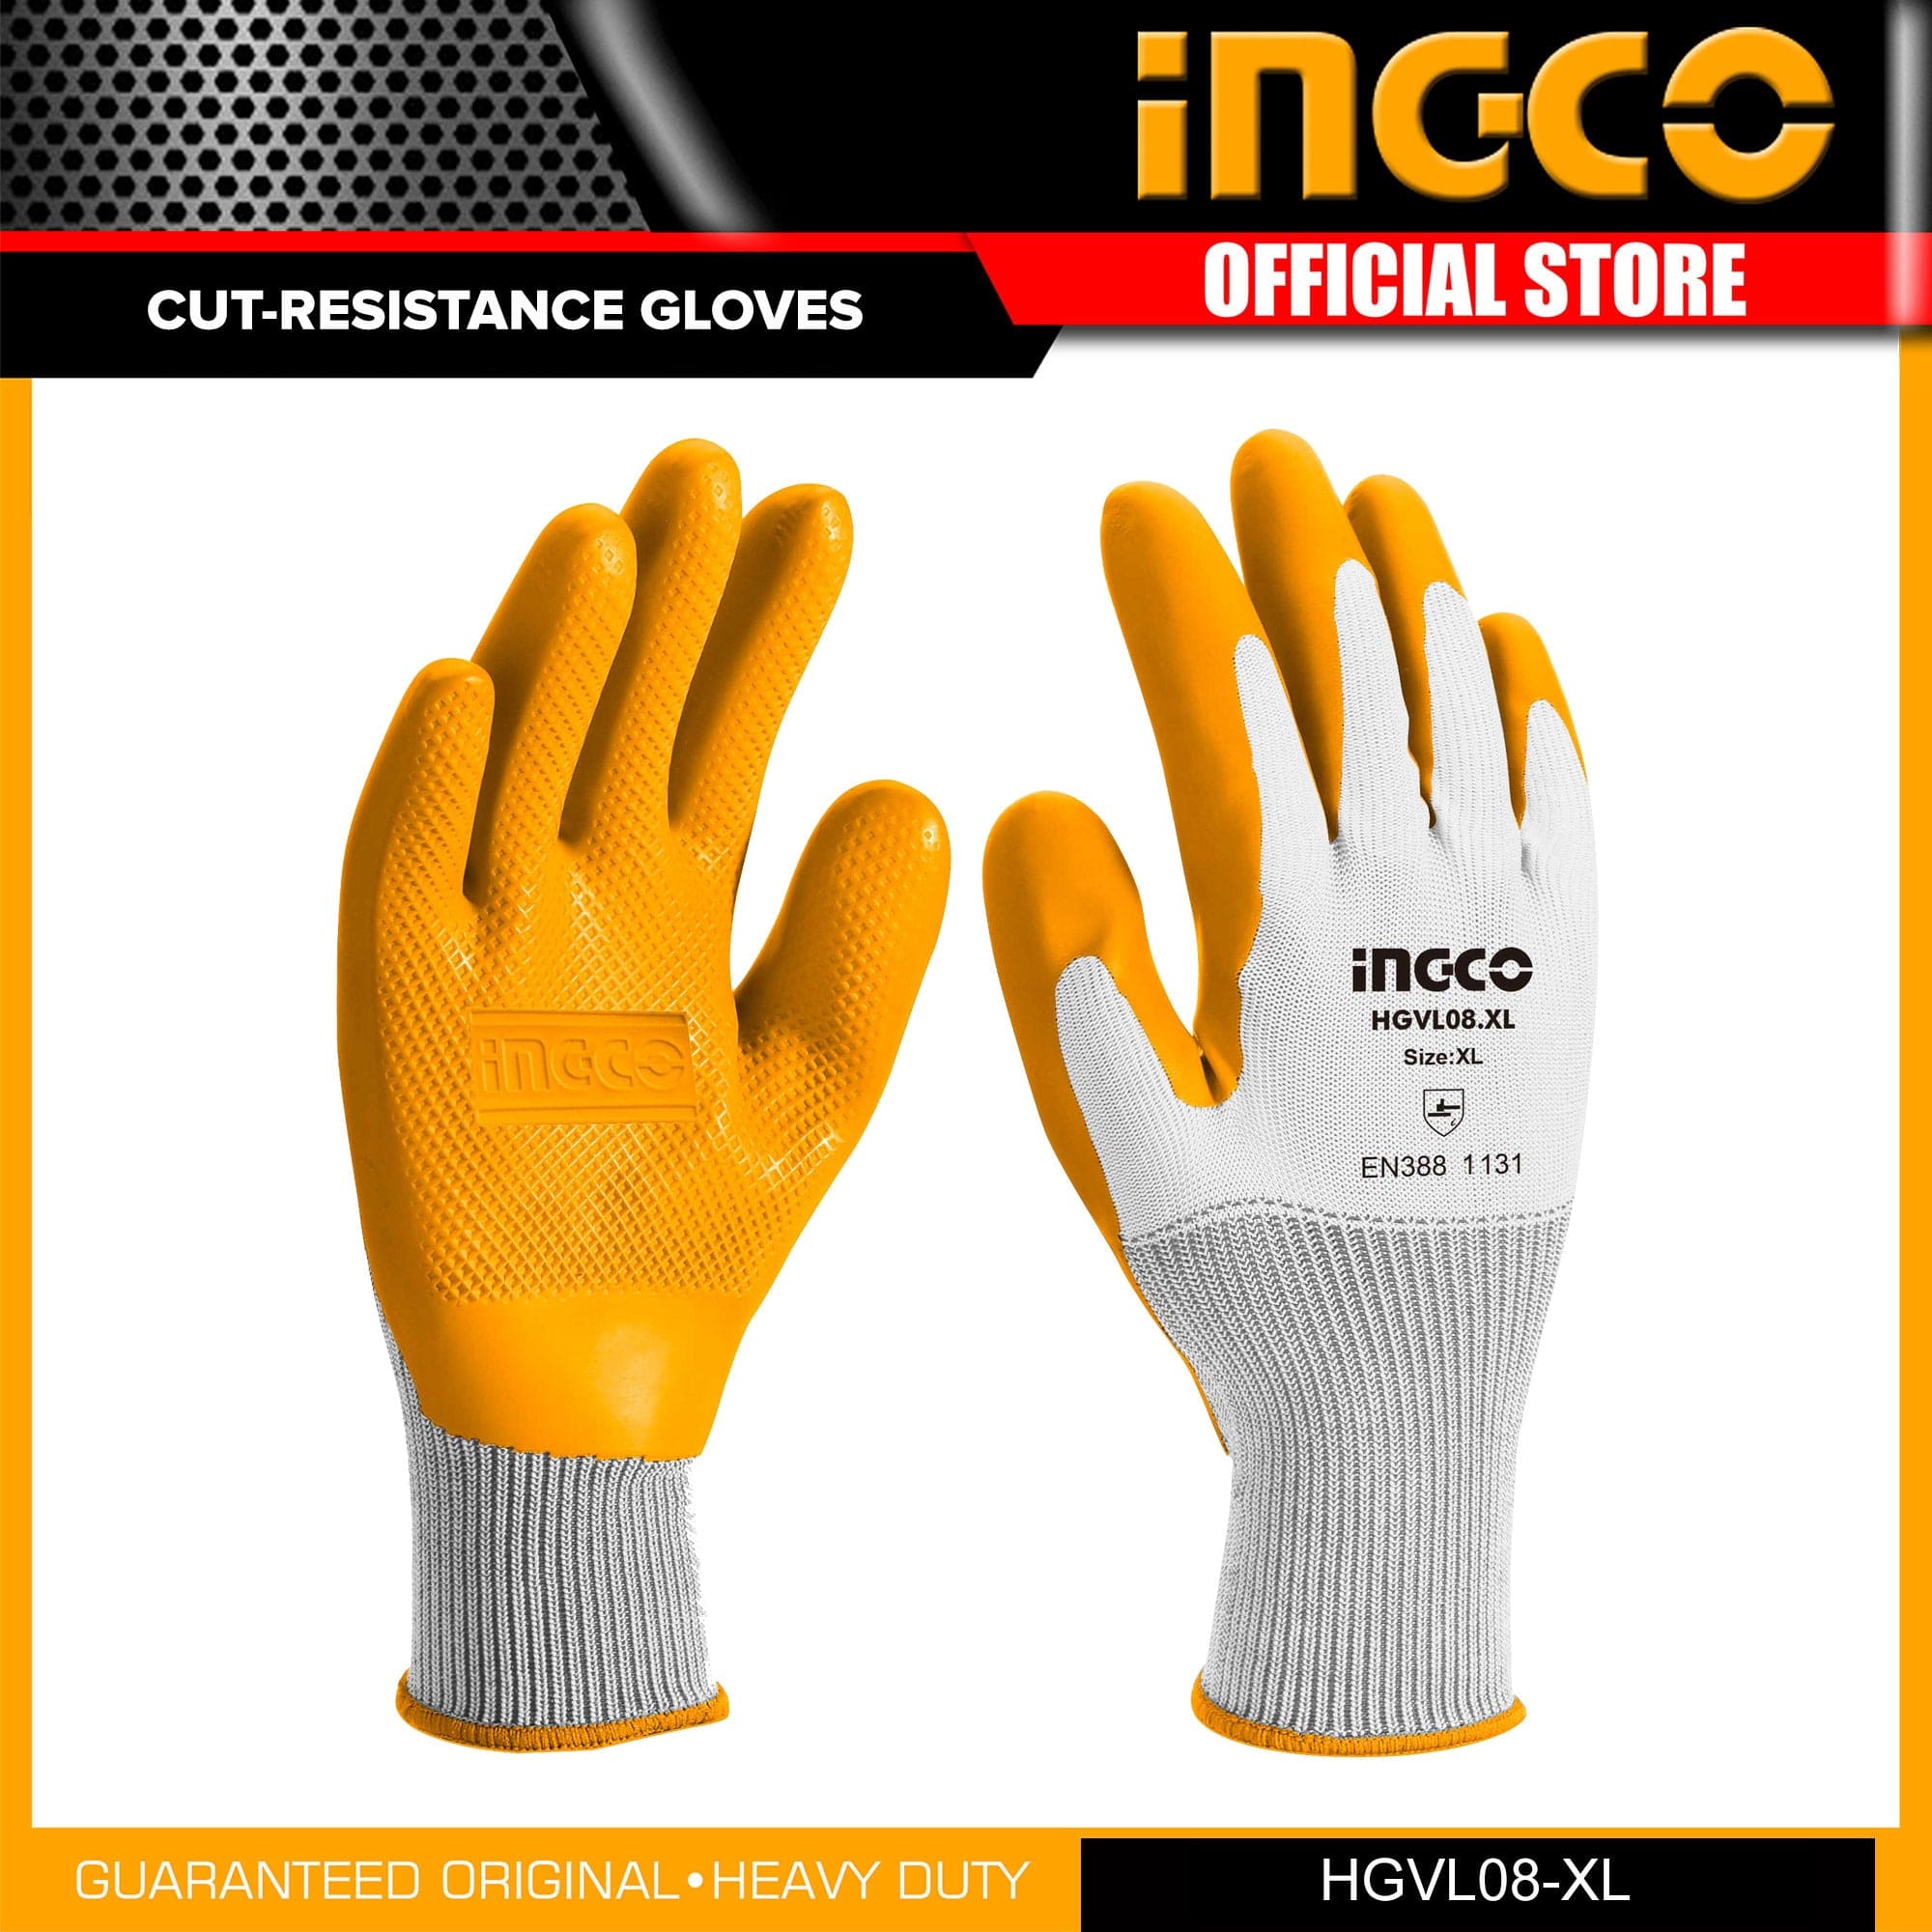 Ingco Industrial Latex Gloves - HGVL08-XL | Shop Online in Accra, Ghana - Supply Master Work Gloves Buy Tools hardware Building materials